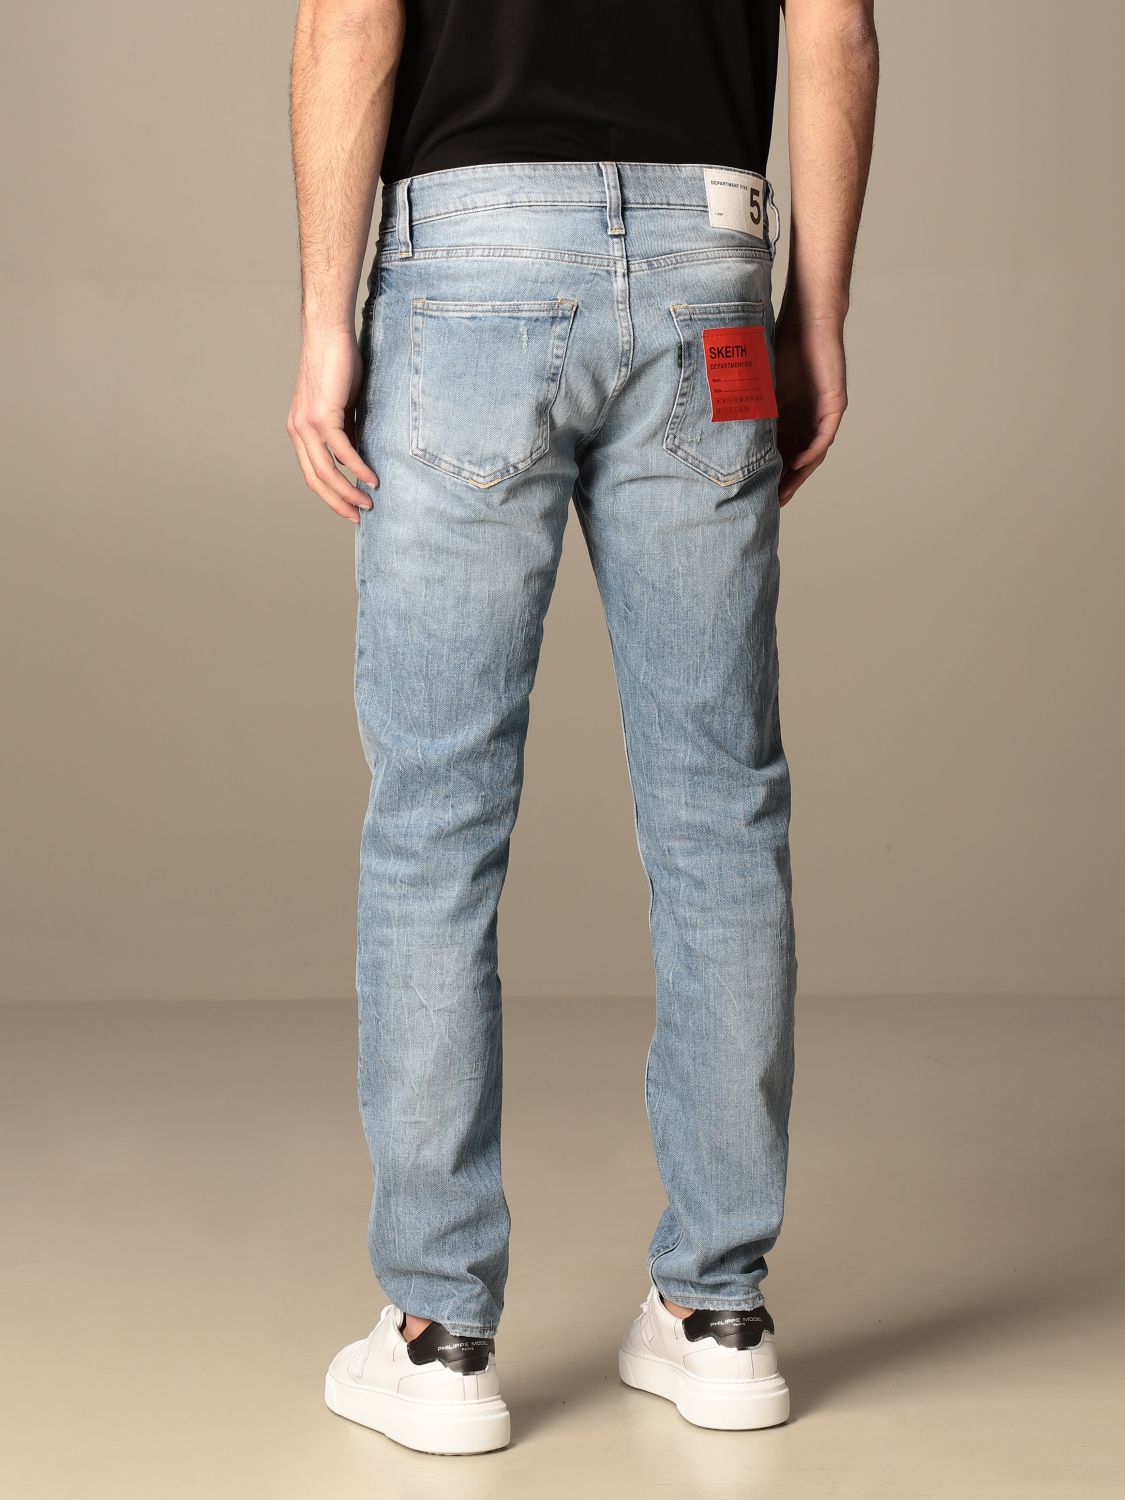 Skeith Department Five jeans in used stretch denim